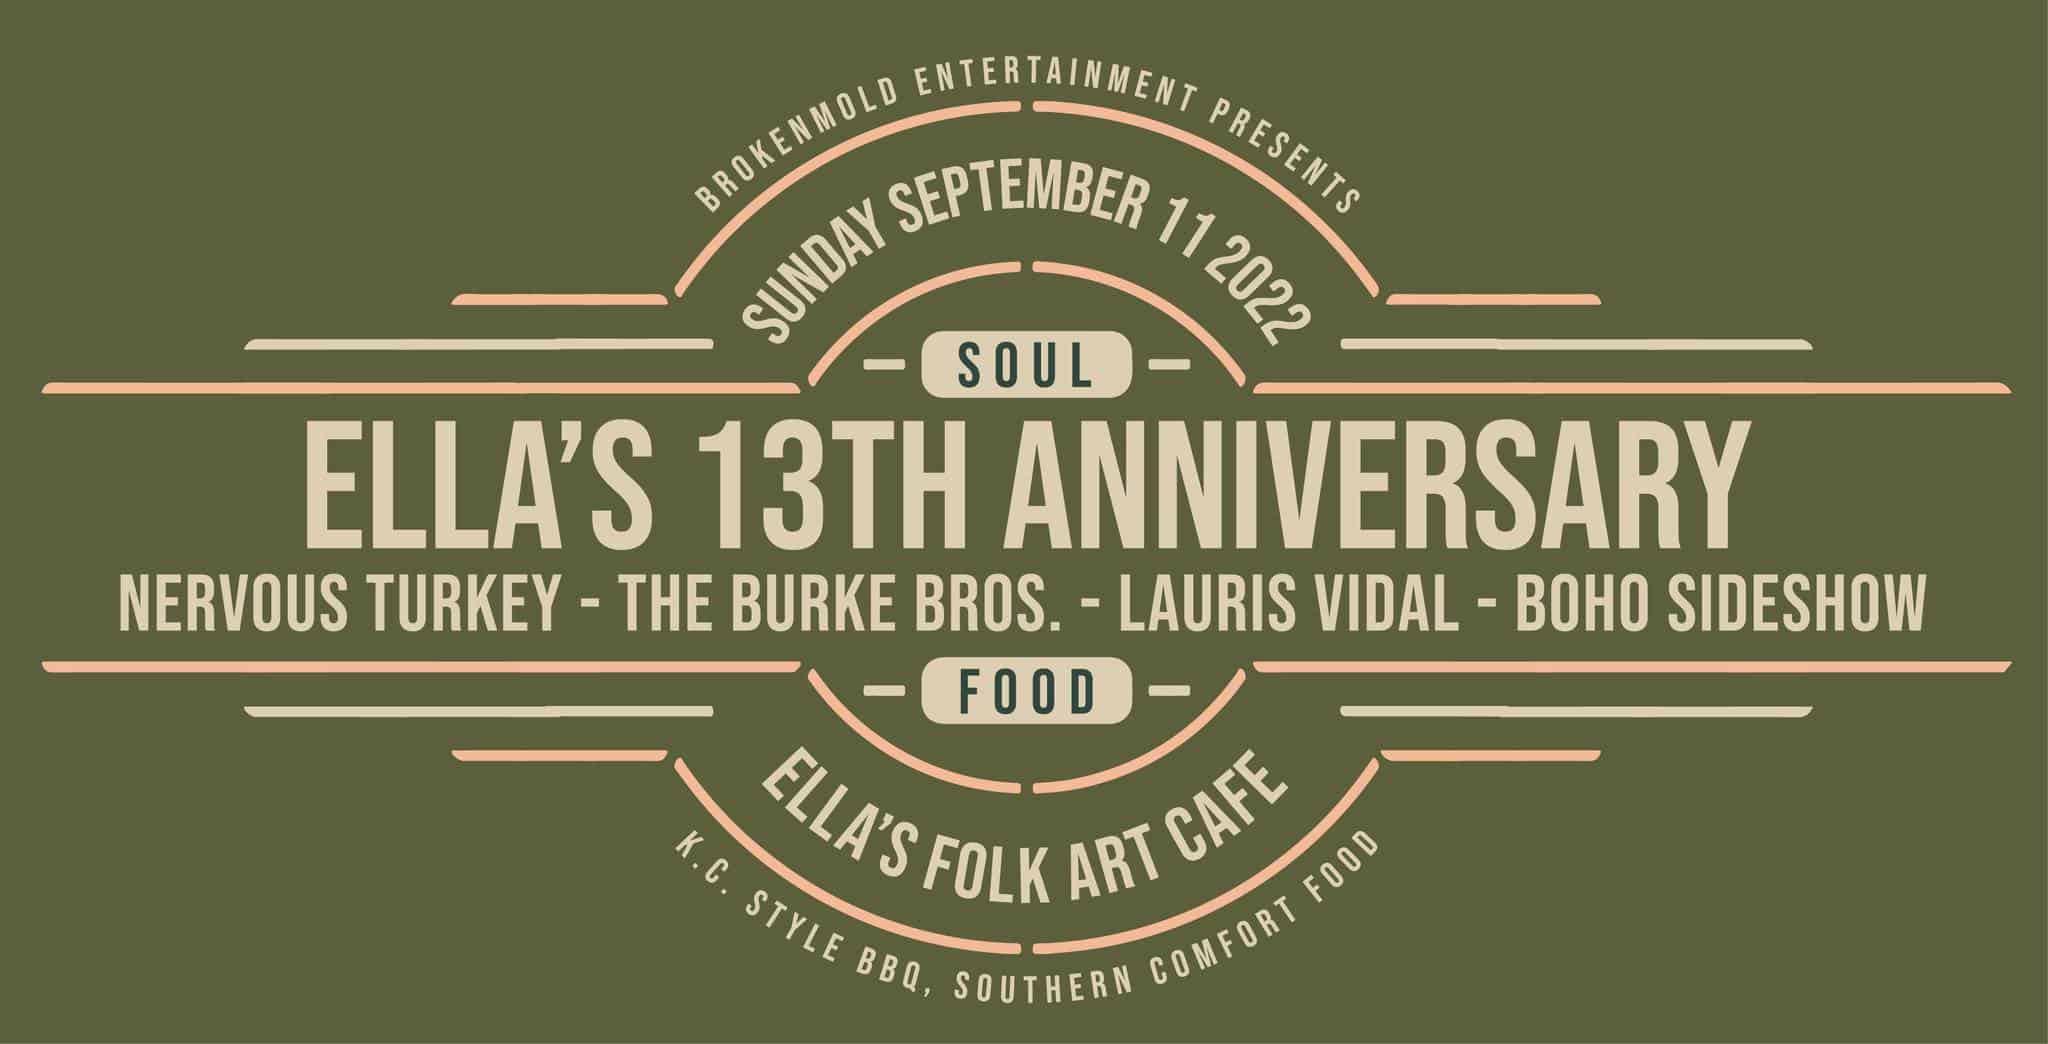 Celebrate Ella's 13th Anniversary with tons of Music on Sunday September 11